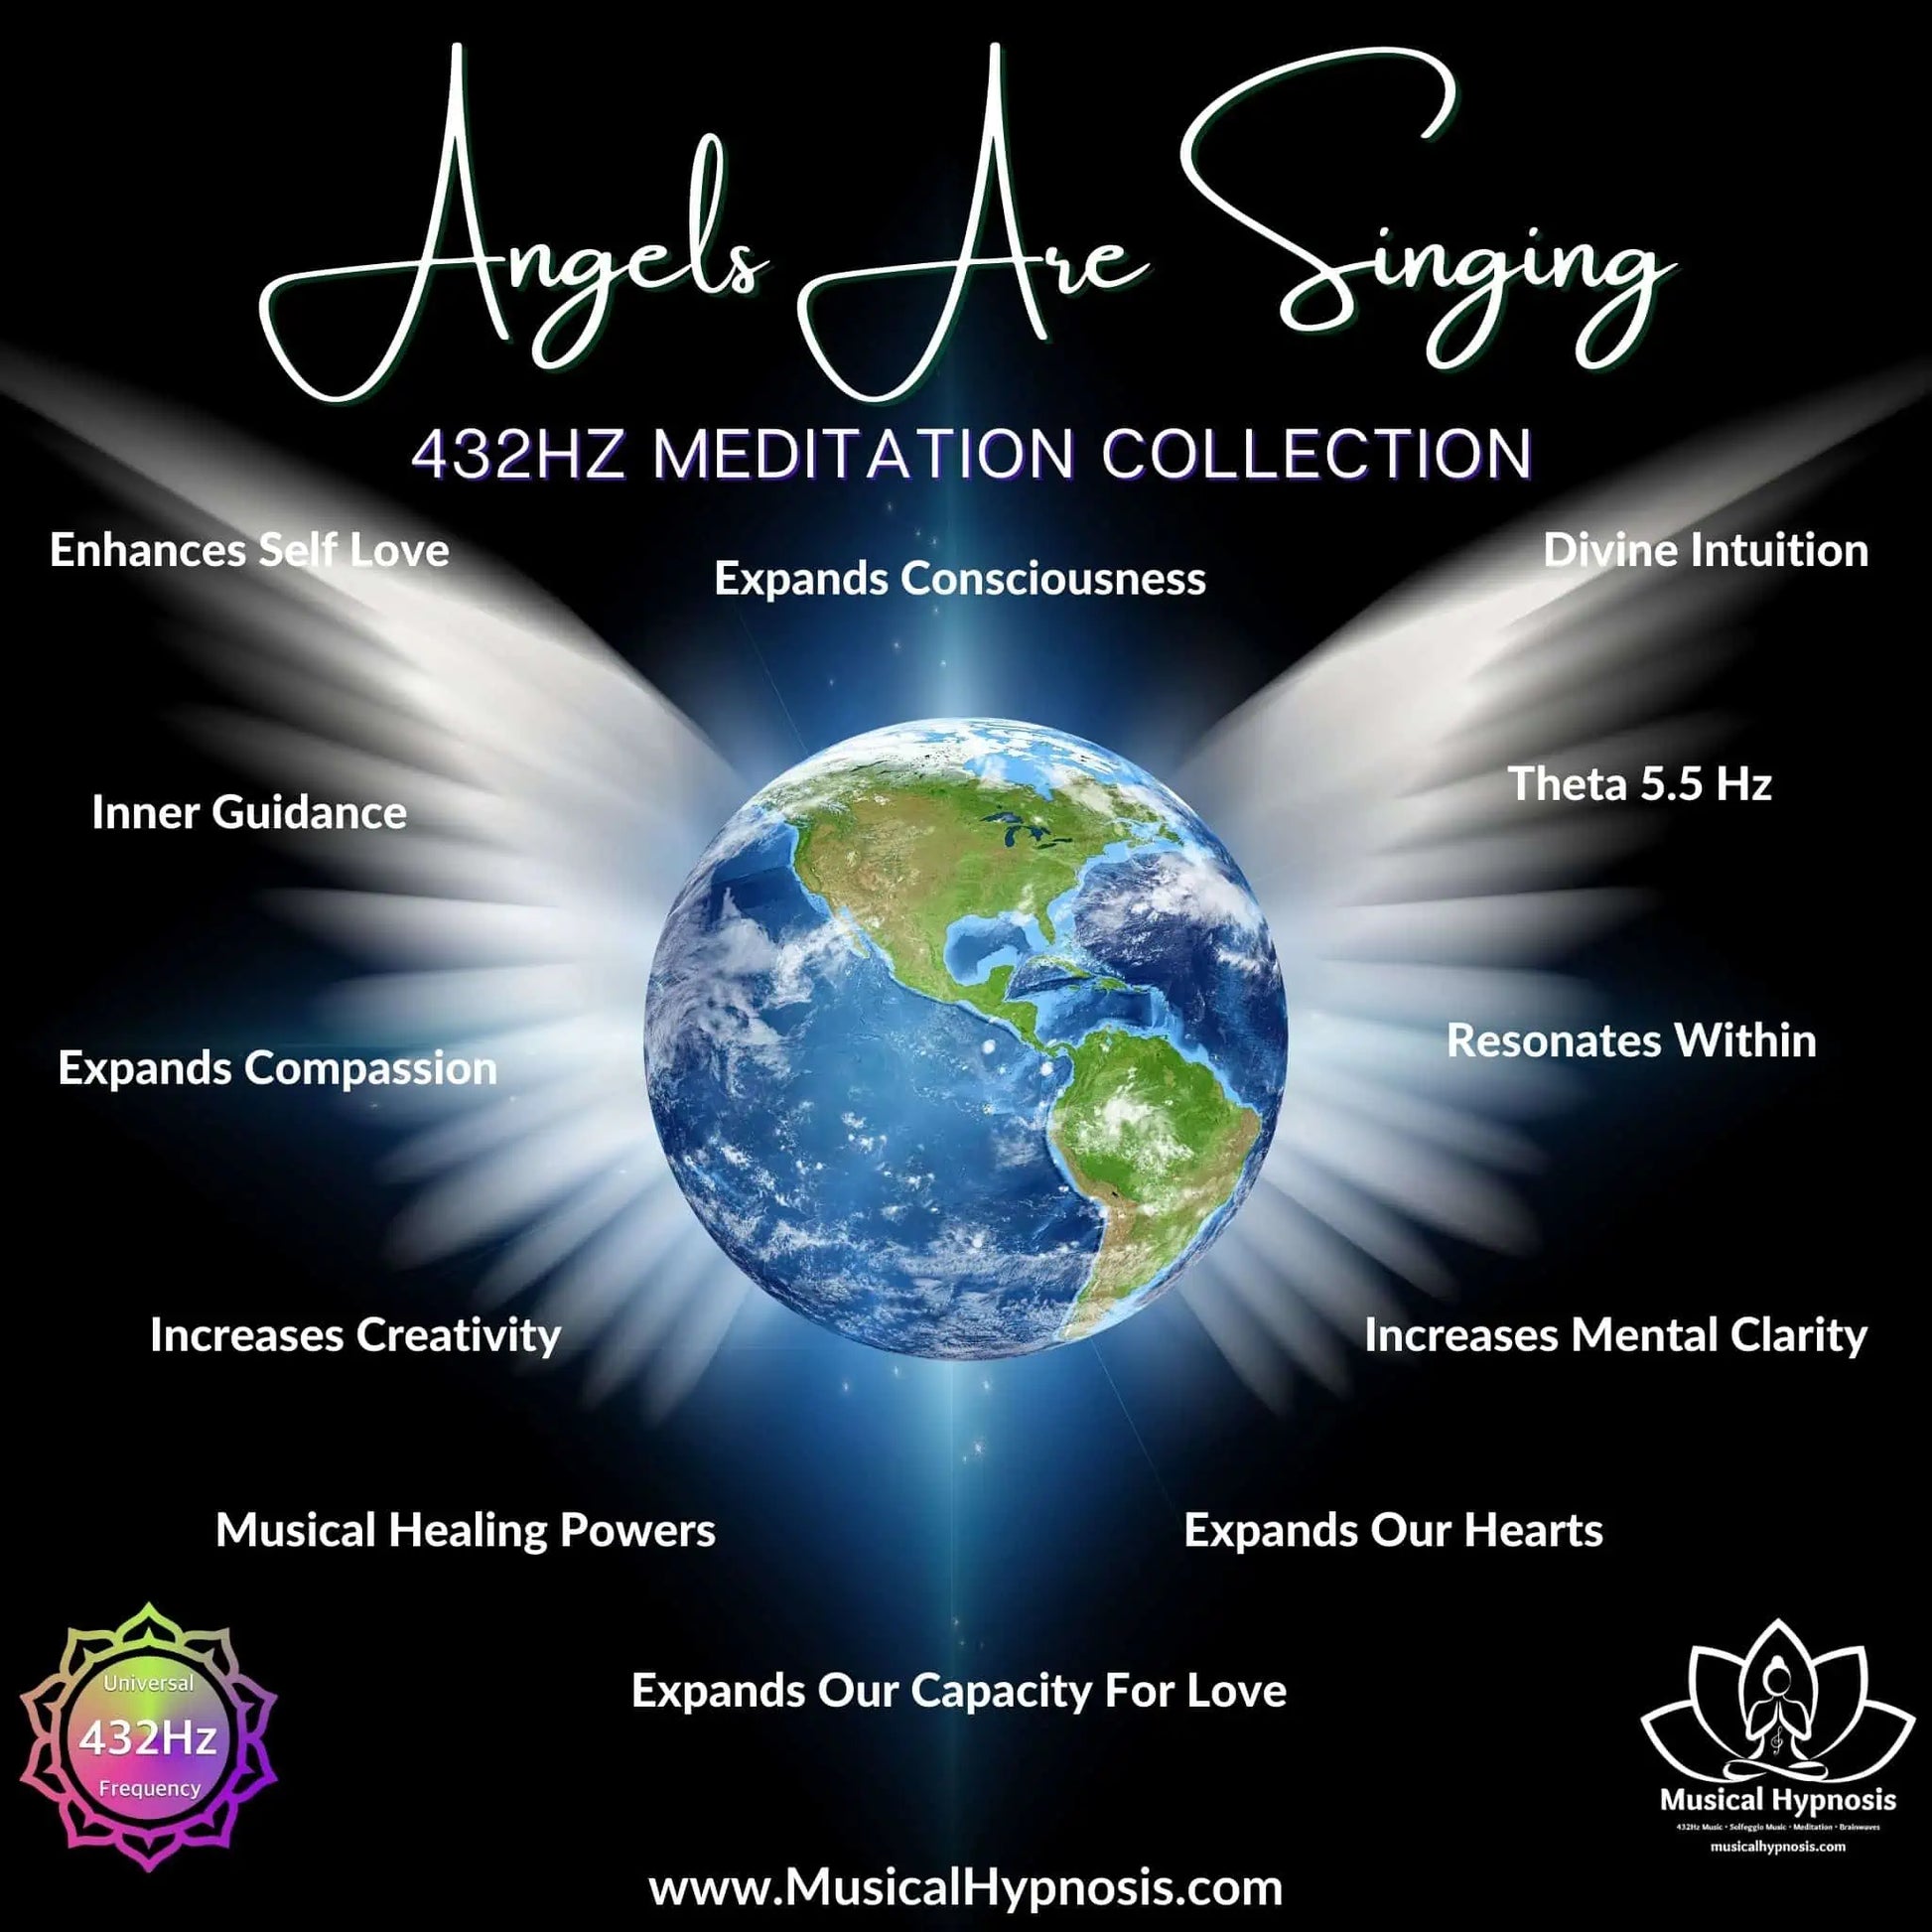 Angels Are Singing • 432Hz Meditation Collection by Musical Hypnosis